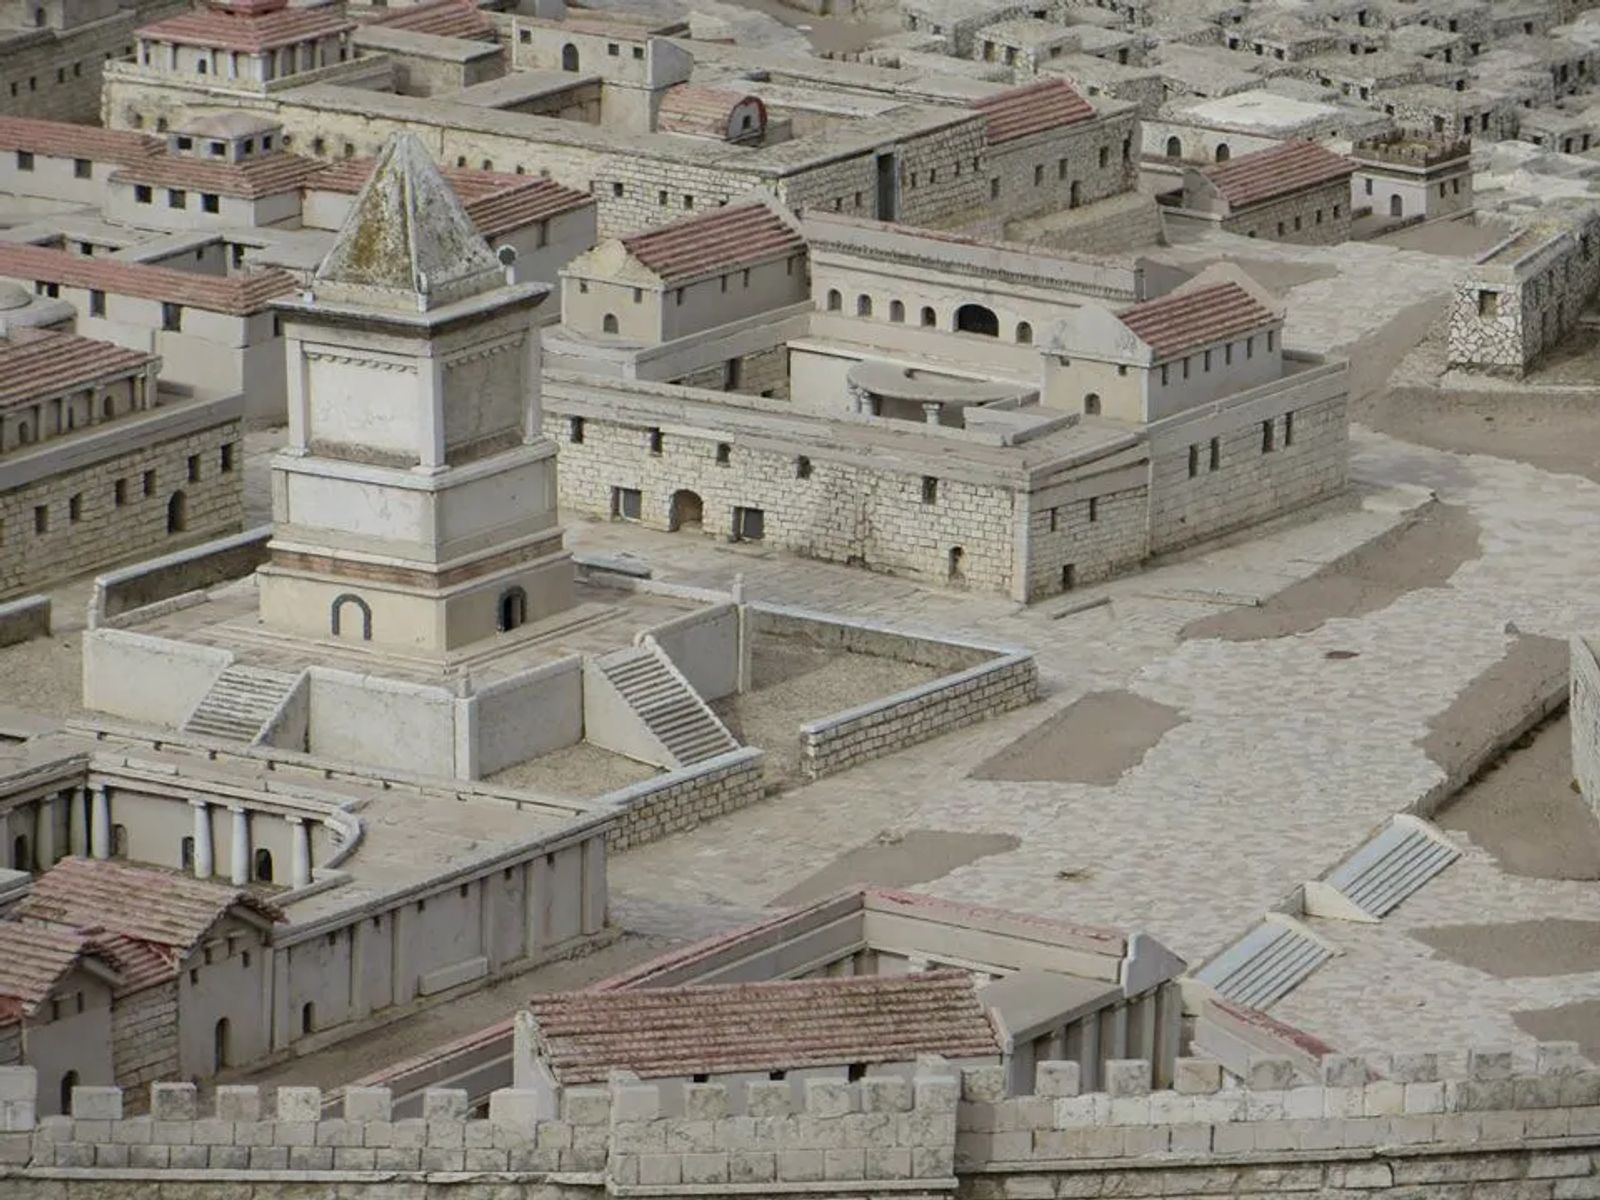 Model of the Ancient City of Jerusalem at the Israel Museum